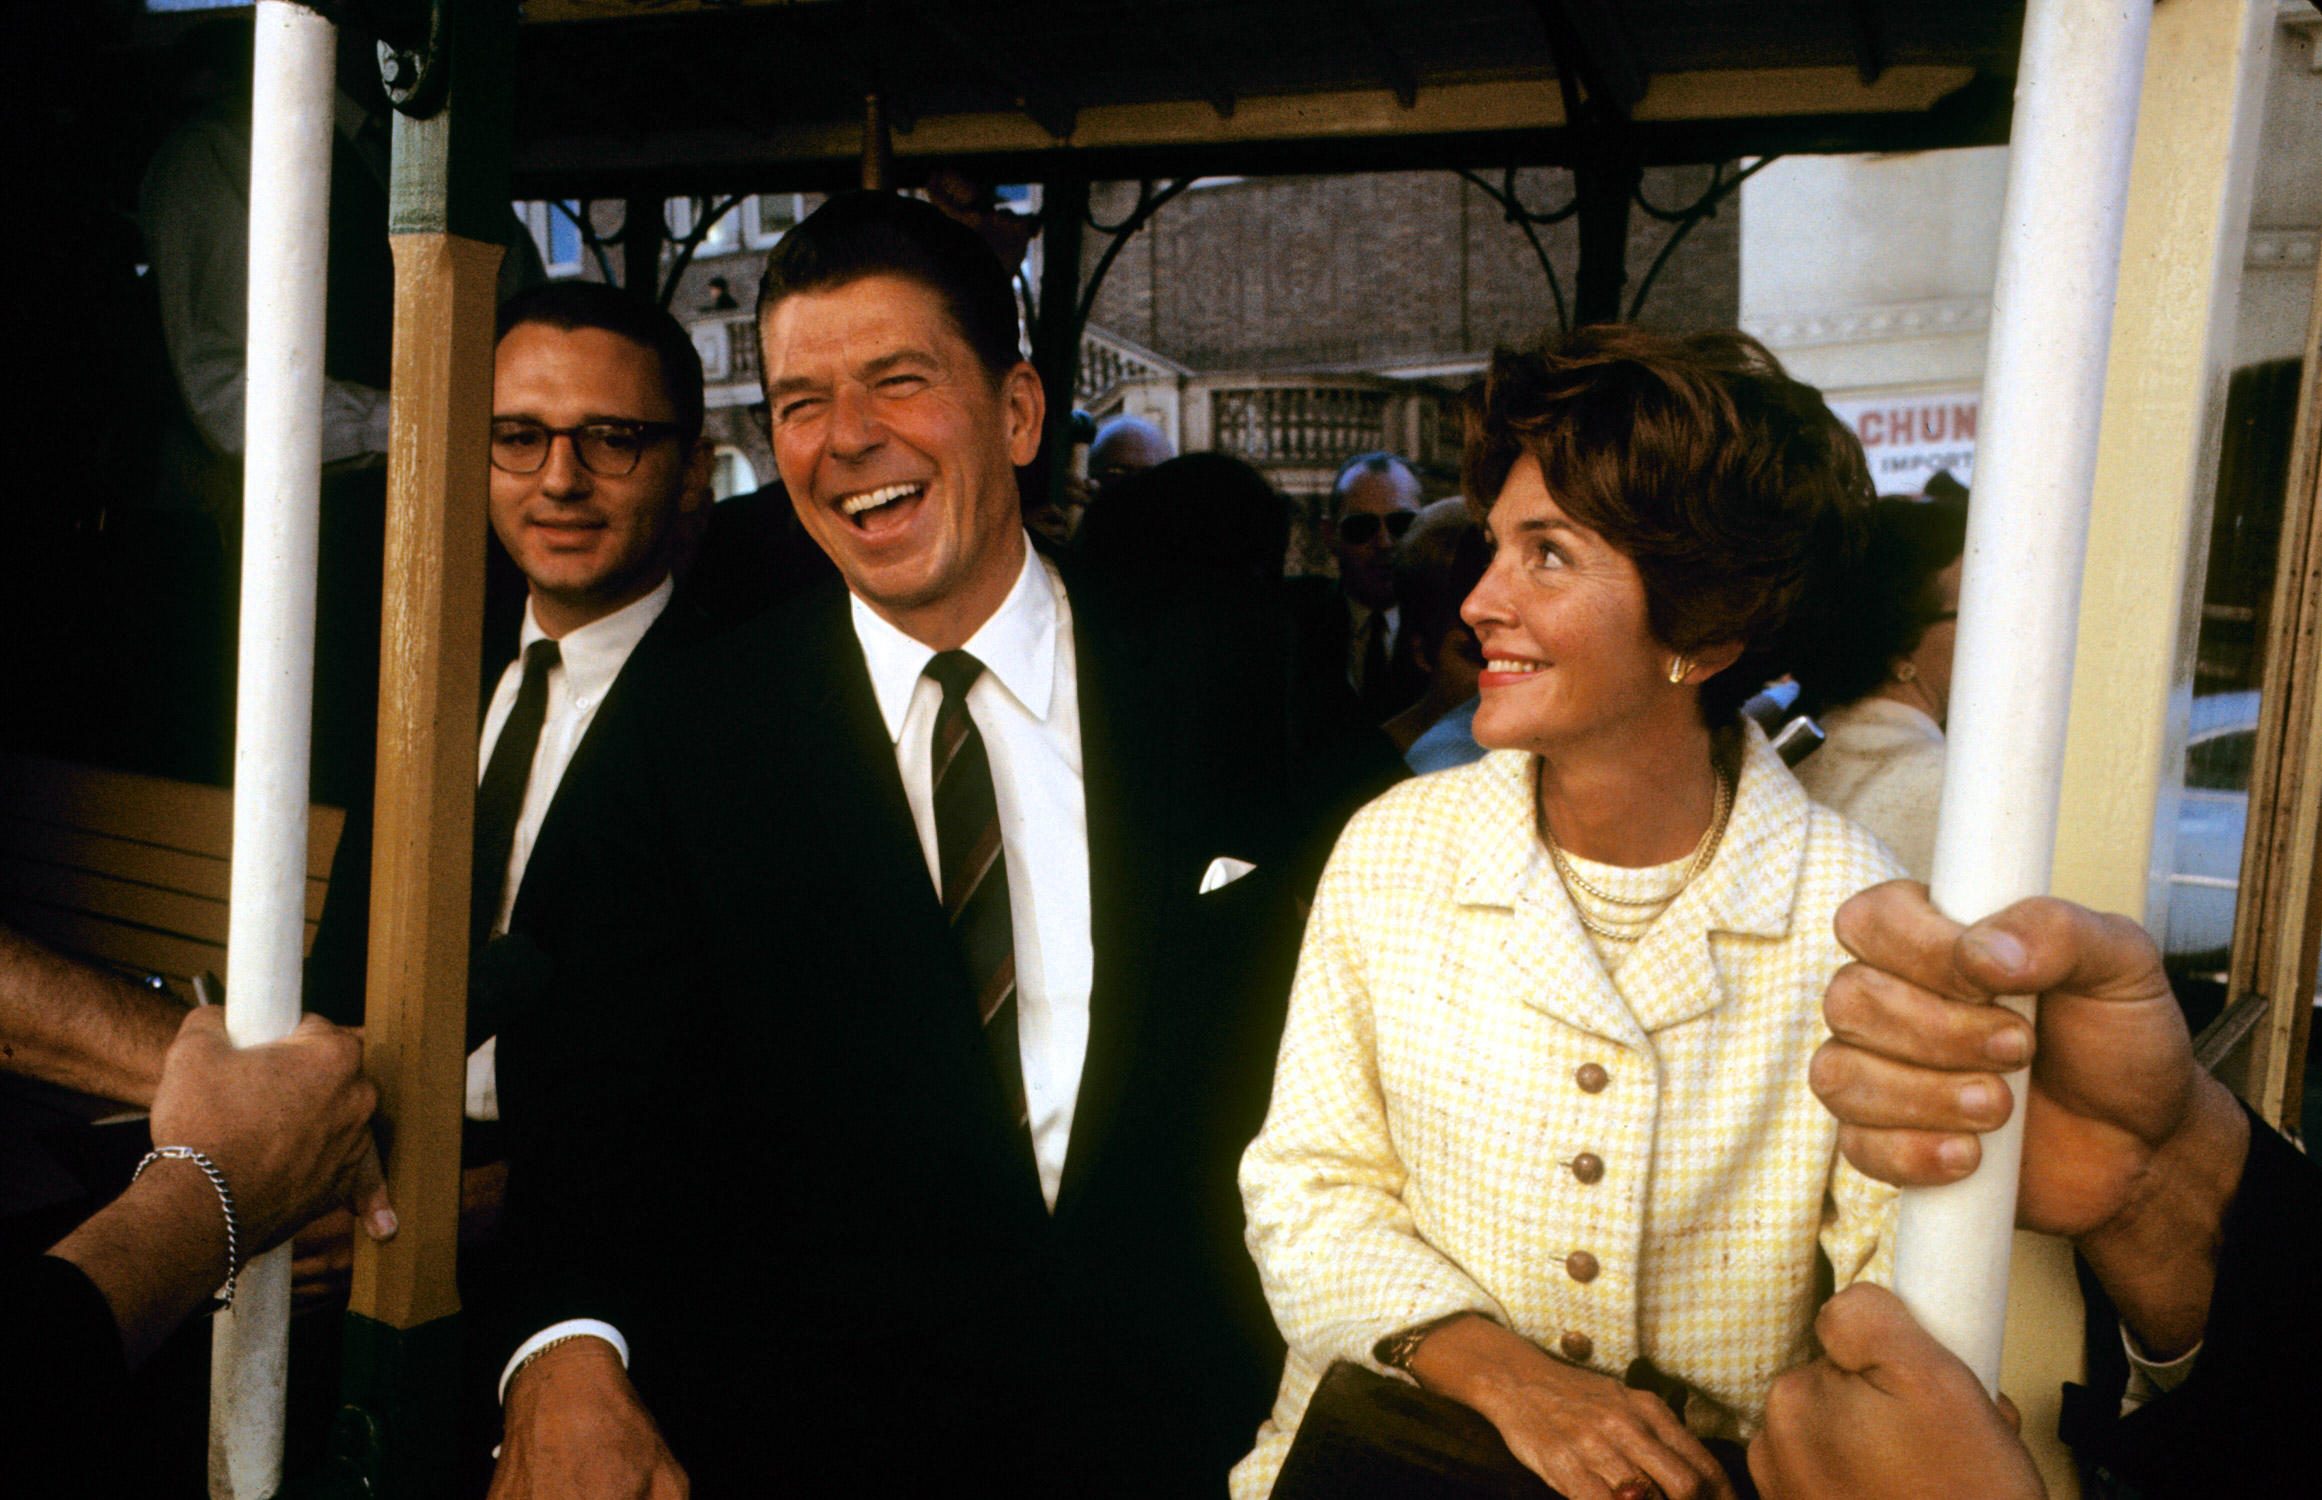 Nancy Reagan with her husband Ronald Reagan on the campaign trail, 1966.